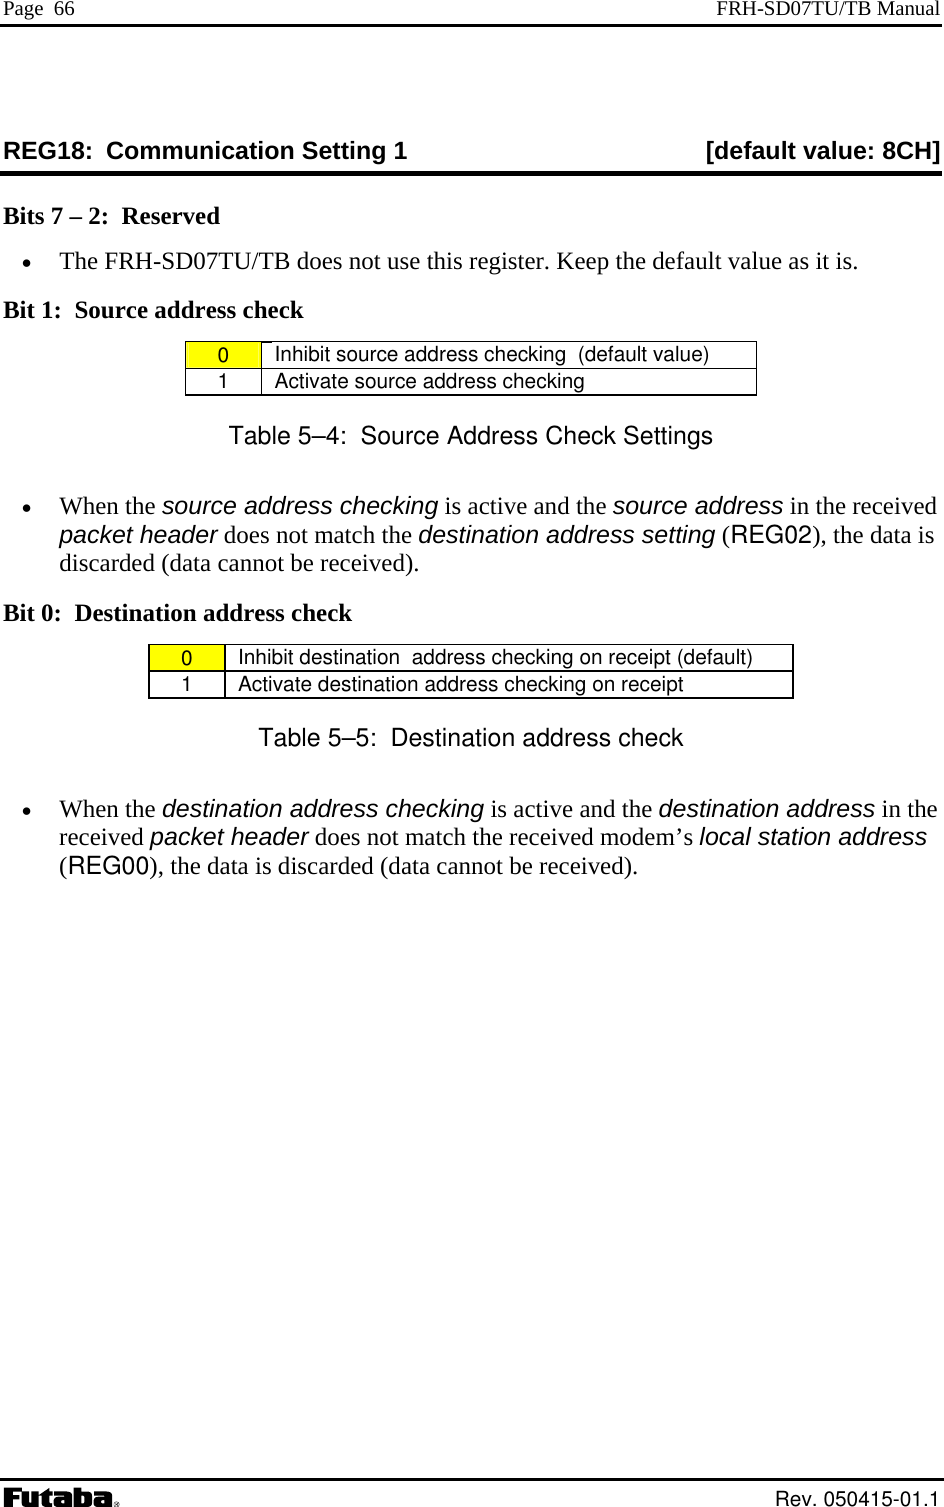 Page  66  FRH-SD07TU/TB Manual REG tting 1  [default value: 8CH] 18: Communication SeBits 7Bit 1:  Source address check – 2:  Reserved •  The FRH-SD07TU/TB does not use this register. Keep the default value as it is.  0   Inhibit source address checking  (default value) 1   Activate source address checking Table 5–4:  Source Address Check Settings • ta is ceived). Bit 0When the source address checking is active and the source address in the received packet header does not match the destination address setting (REG02), the dadiscarded (data cannot be re:  Destination address check 0   Inhibit destination  address checking on receipt (default) 1   Activate destination address checking on receipt Table 5–5:  Destination address check  in the received packet header does not match the received modem’s local station address (REG00), the data is discarded (data cannot be received). •  When the destination address checking is active and the destination address Rev. 050415-01.1 